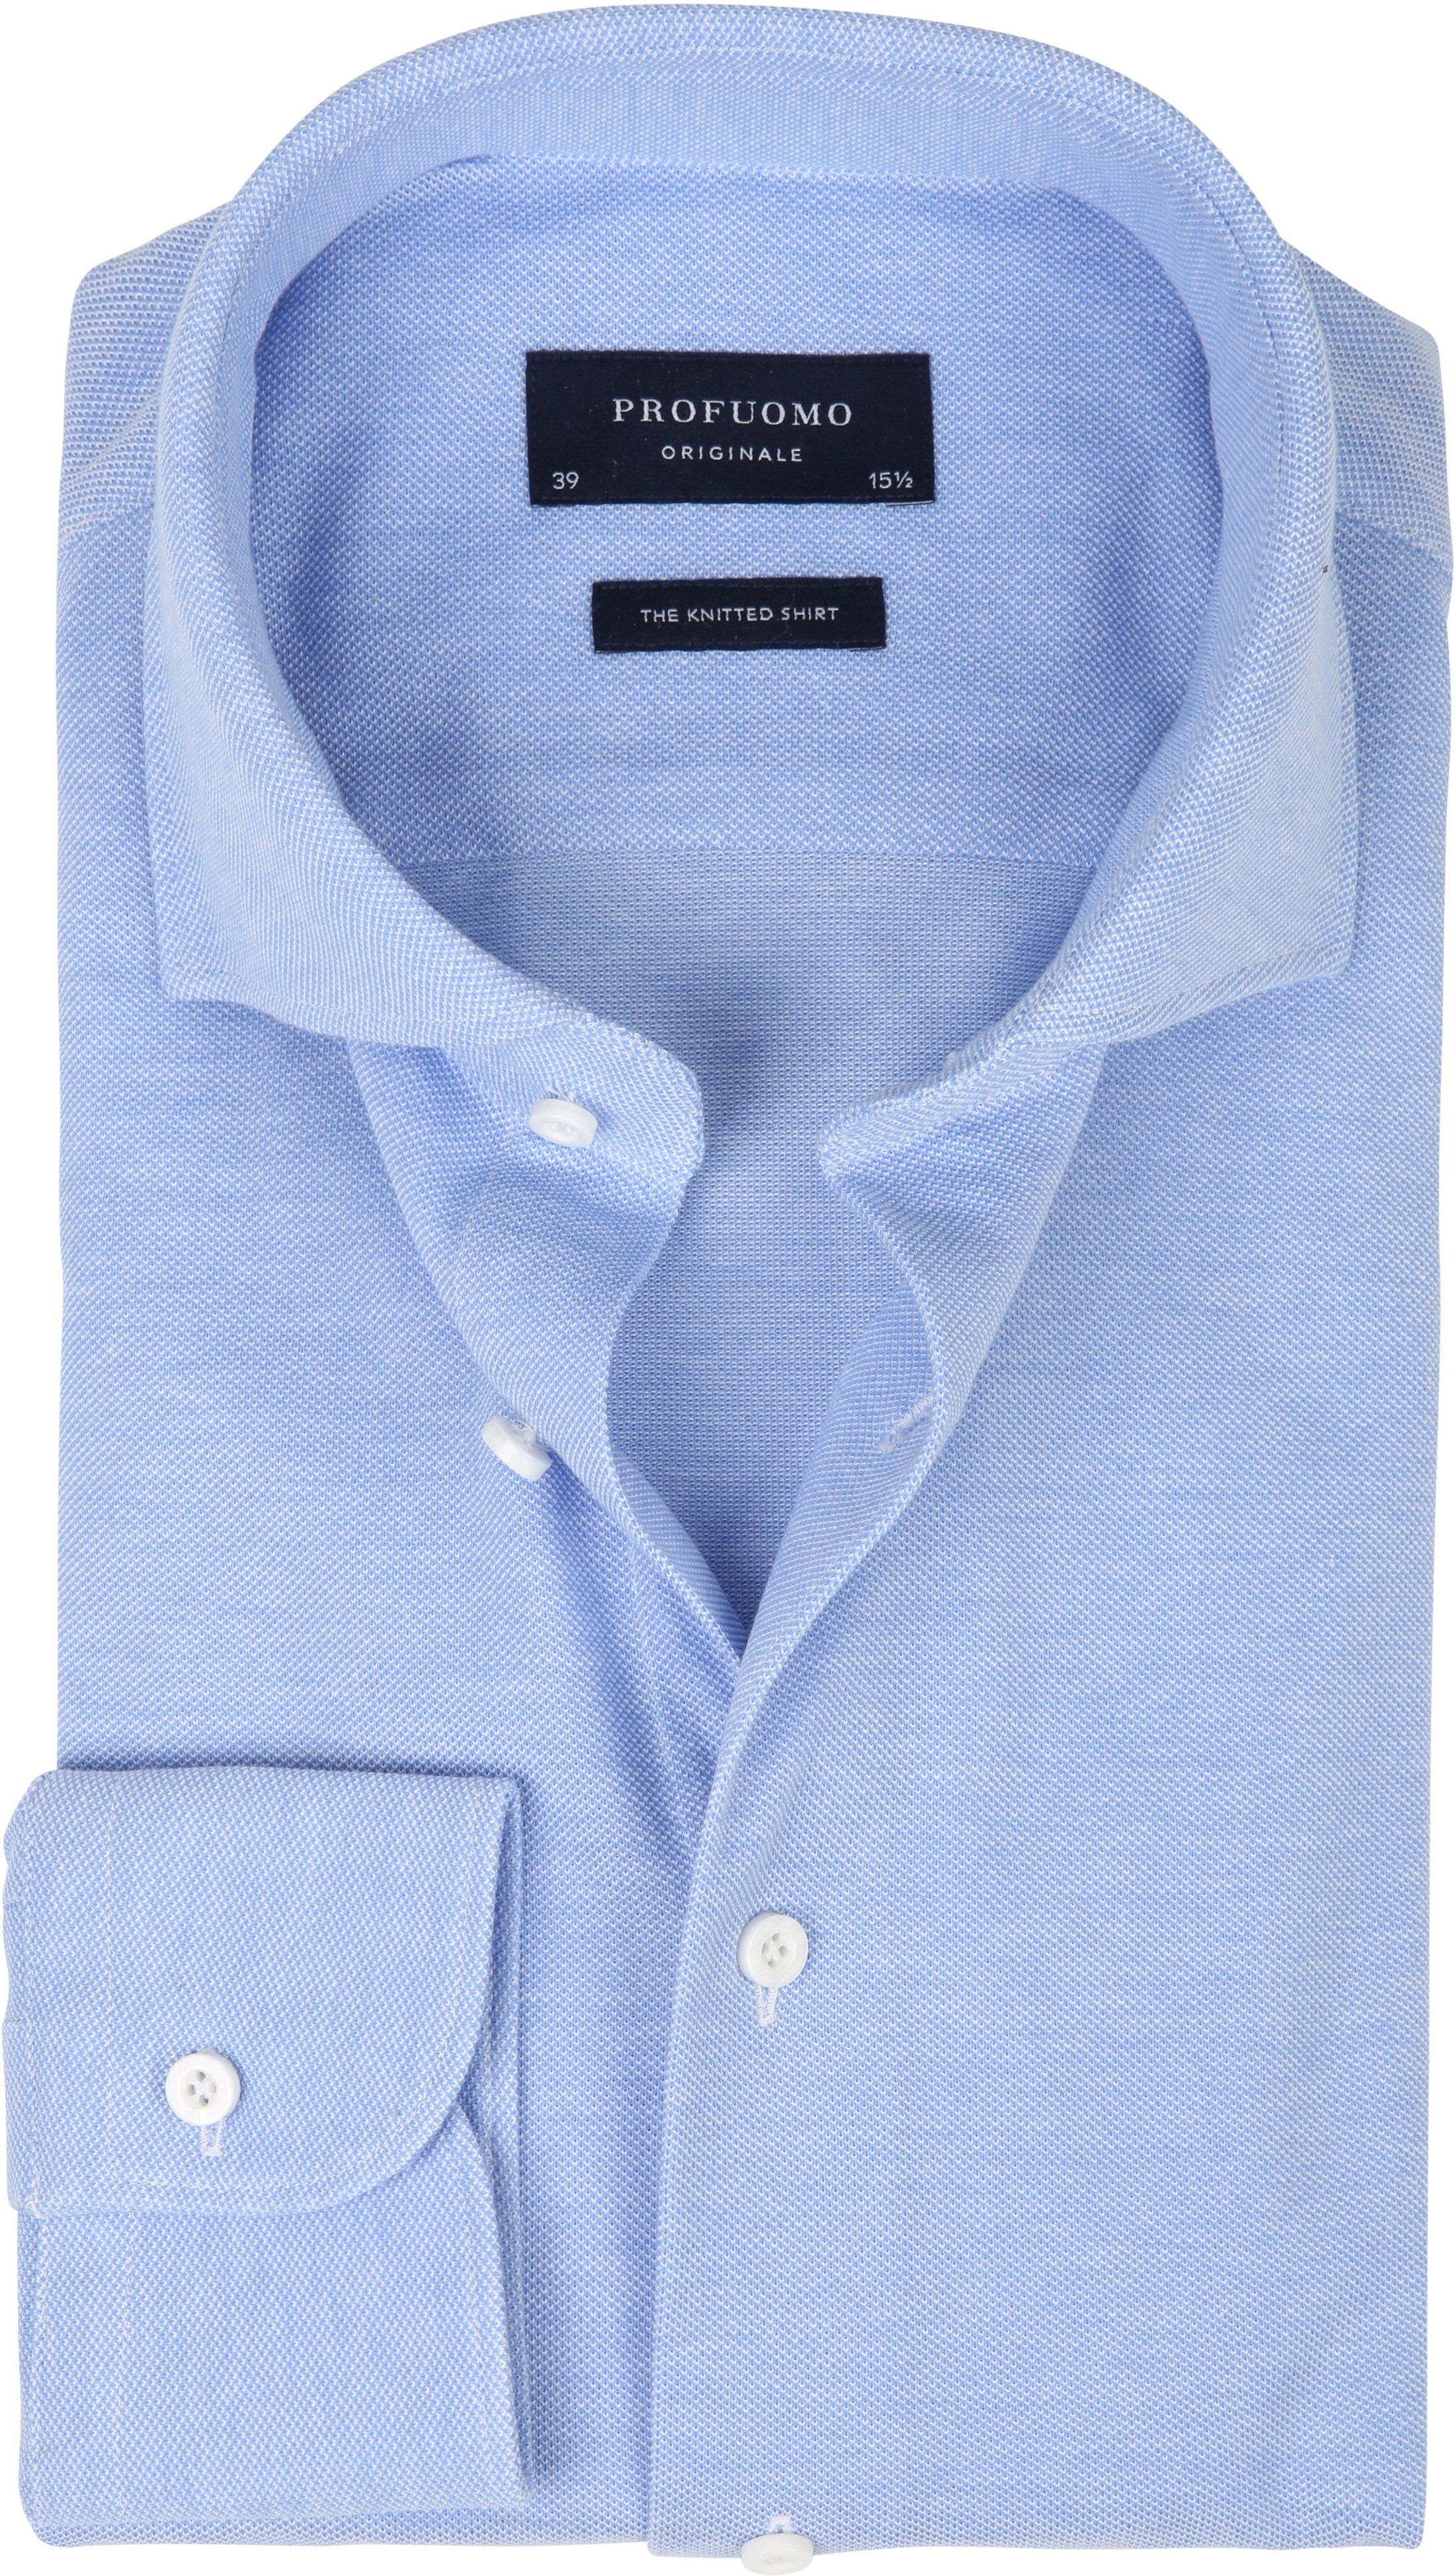 Profuomo Shirt Knitted Slim Fit Blue size 14.5